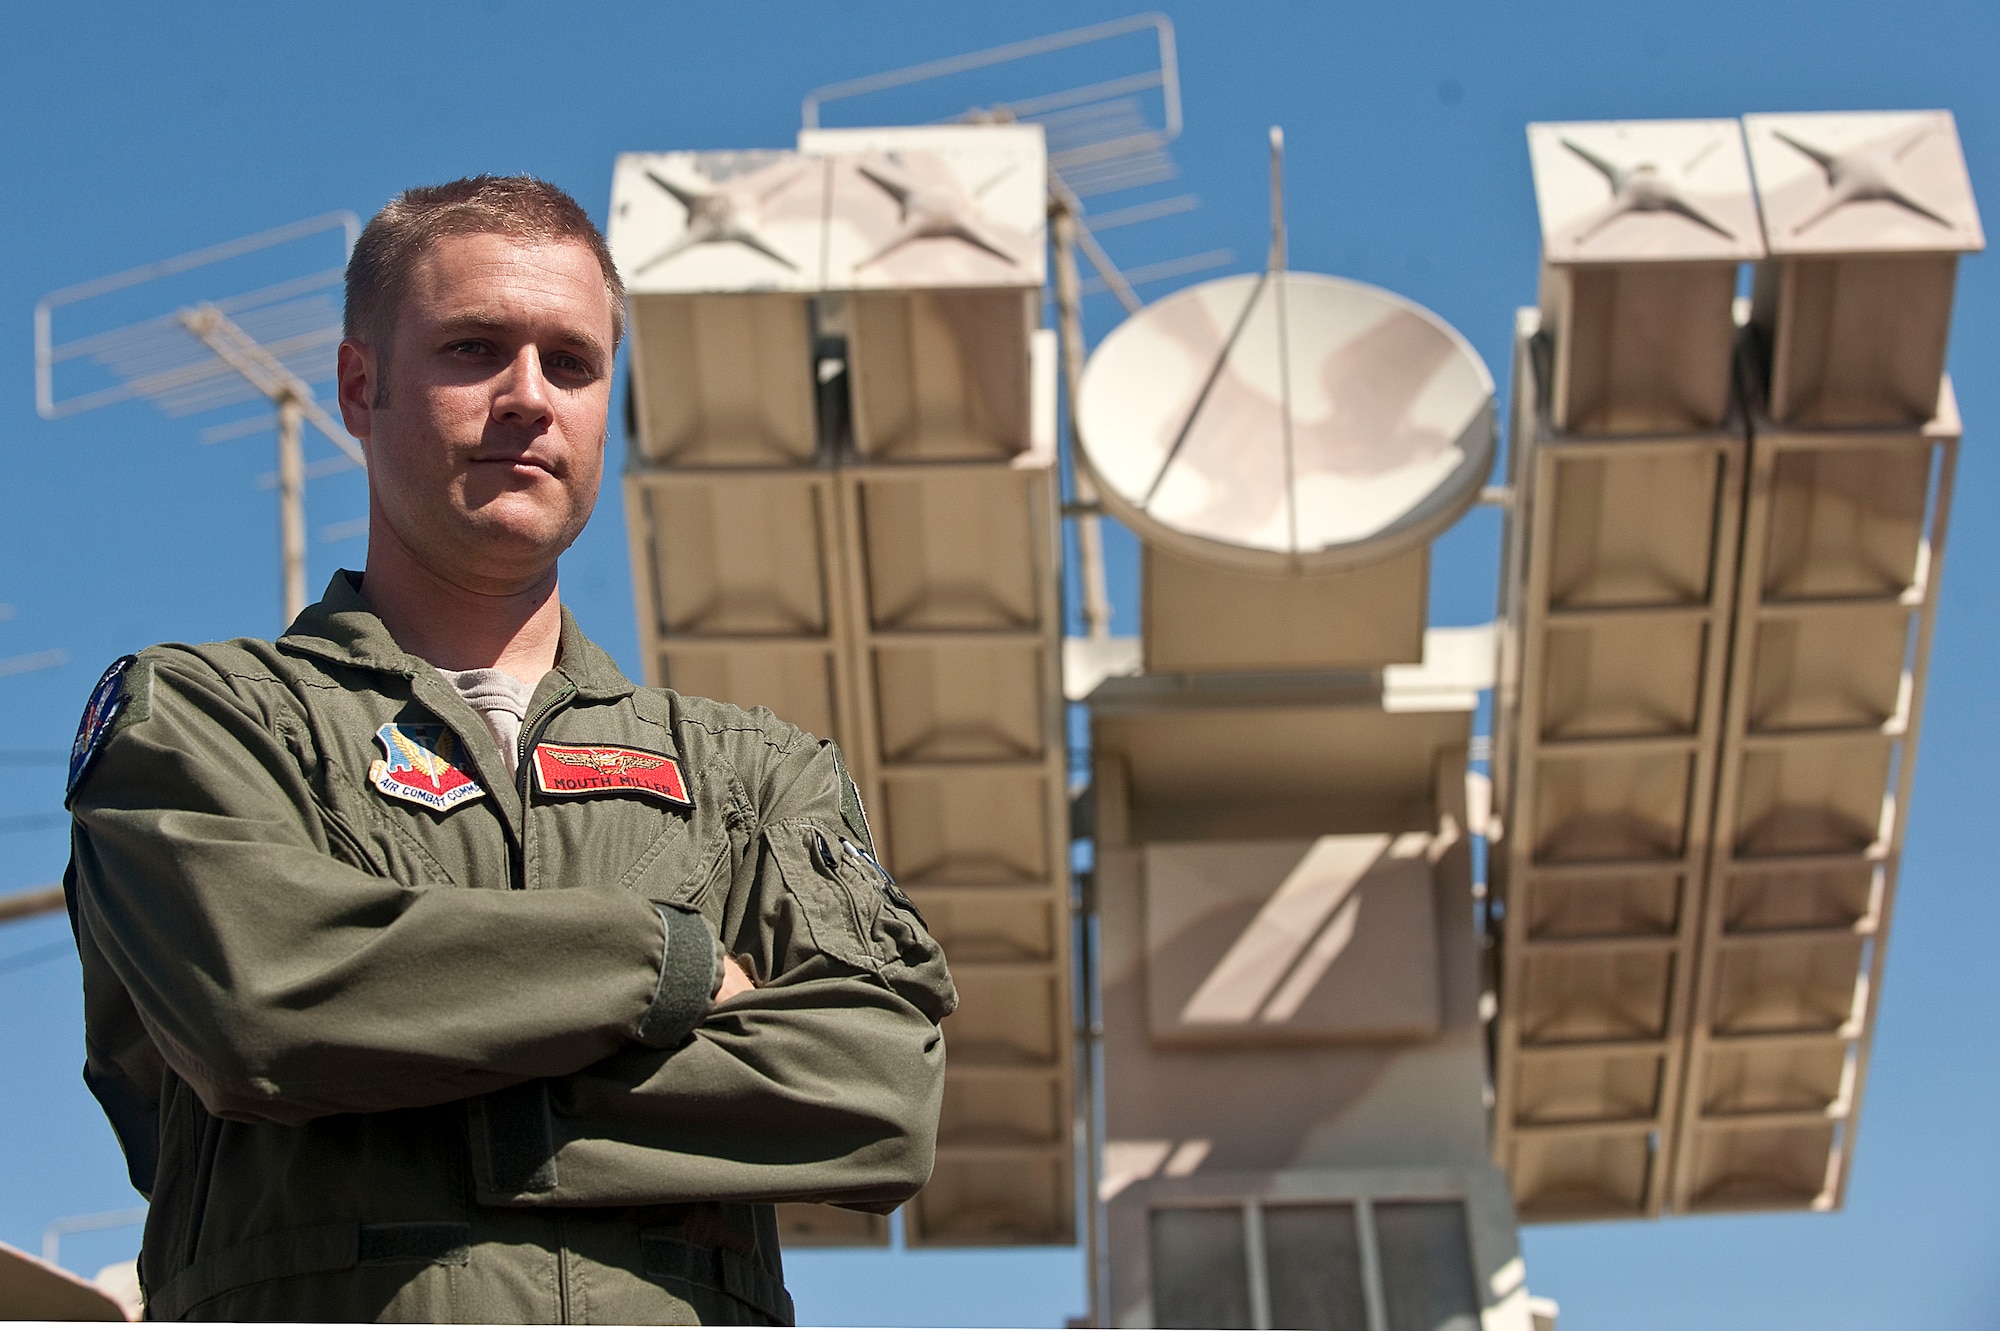 Capt. Jeffery Miller, 507th Air Defense Aggressor Squadron assistant director of operations, stands in front of an SA-9 Gasken, a mobile short-range surface-to-air missile Sept. 19, 2012, at Nellis Air Force Base Nev. Airmen of the 507th ADAS simulate a surface-to-air missile threat during Red Flag and Mission Employment exercises. (U.S. Air Force photo by Staff Sgt. Christopher Hubenthal)